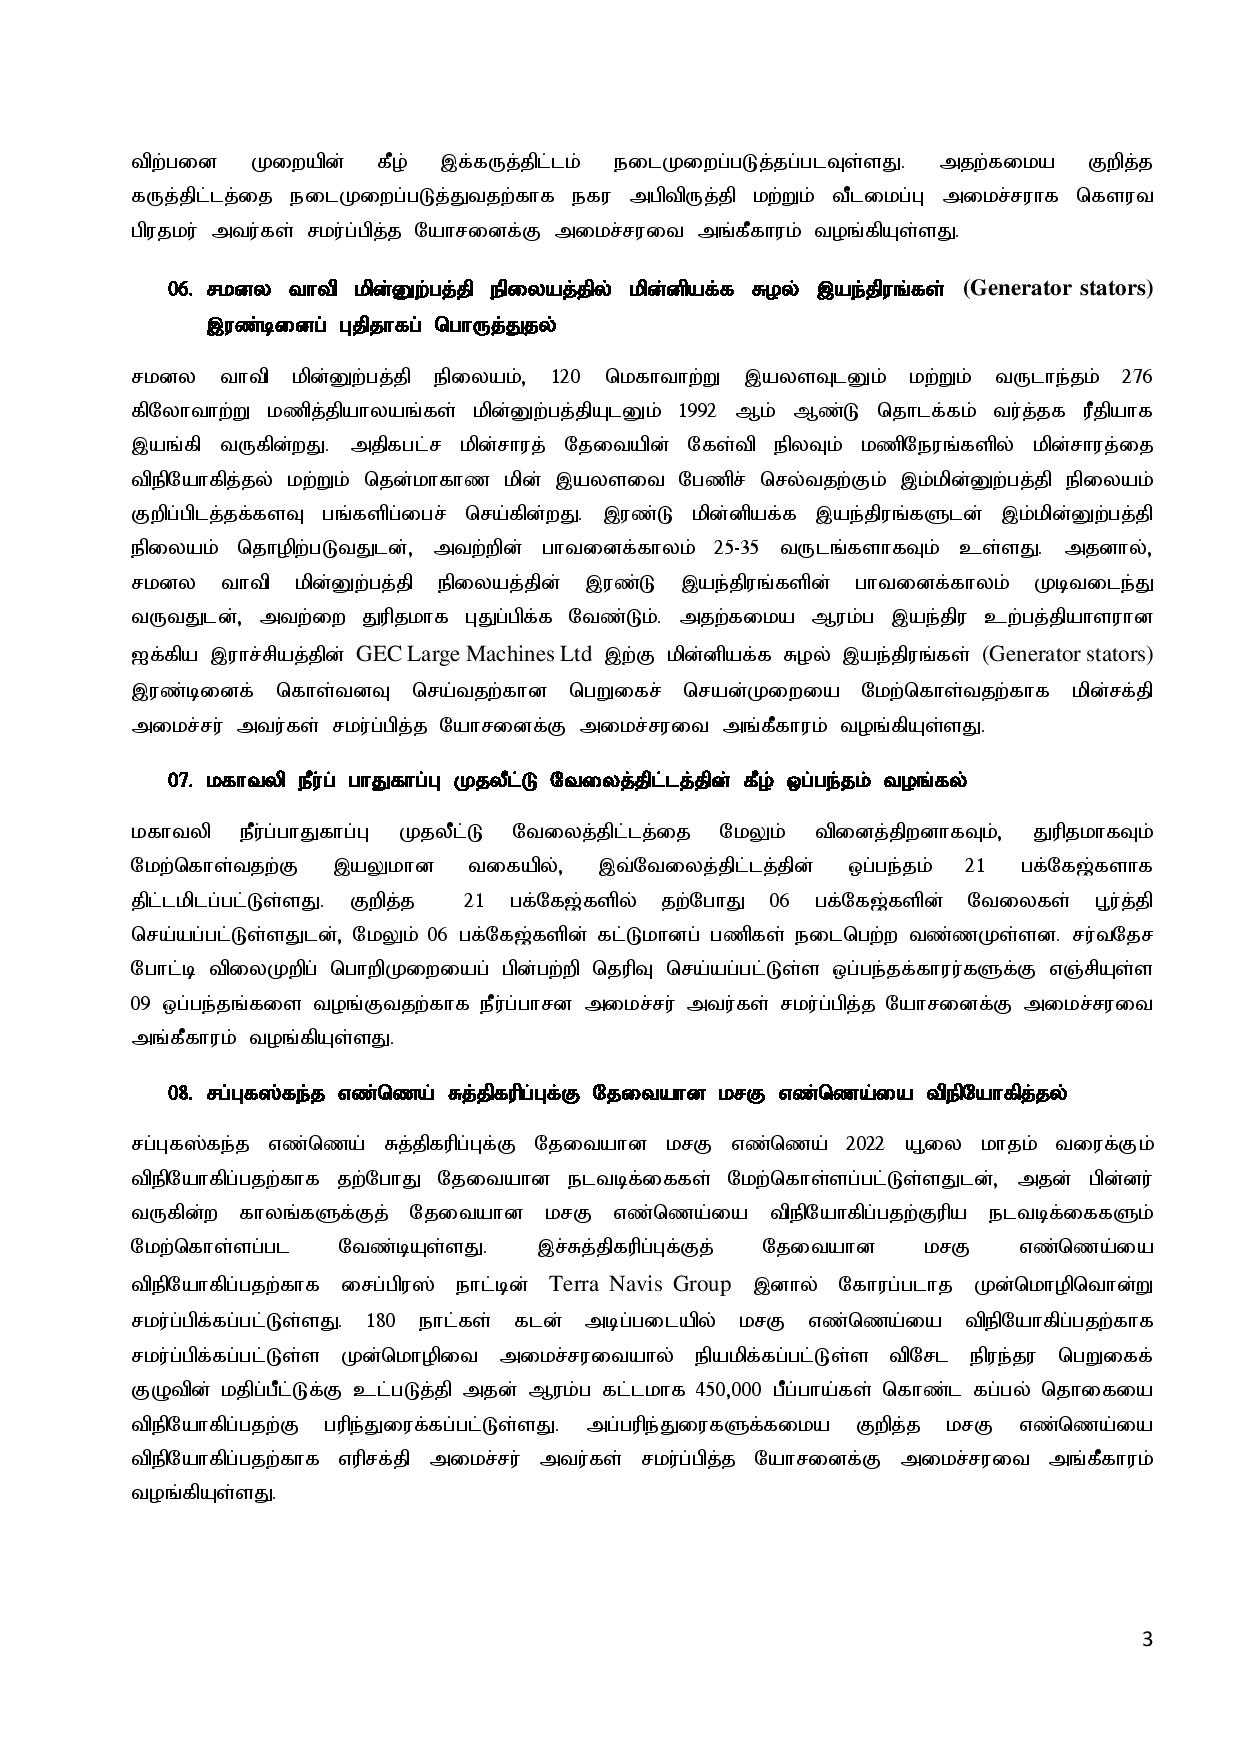 Cabinet Decisions on 31.01.2022 Tamil page 003